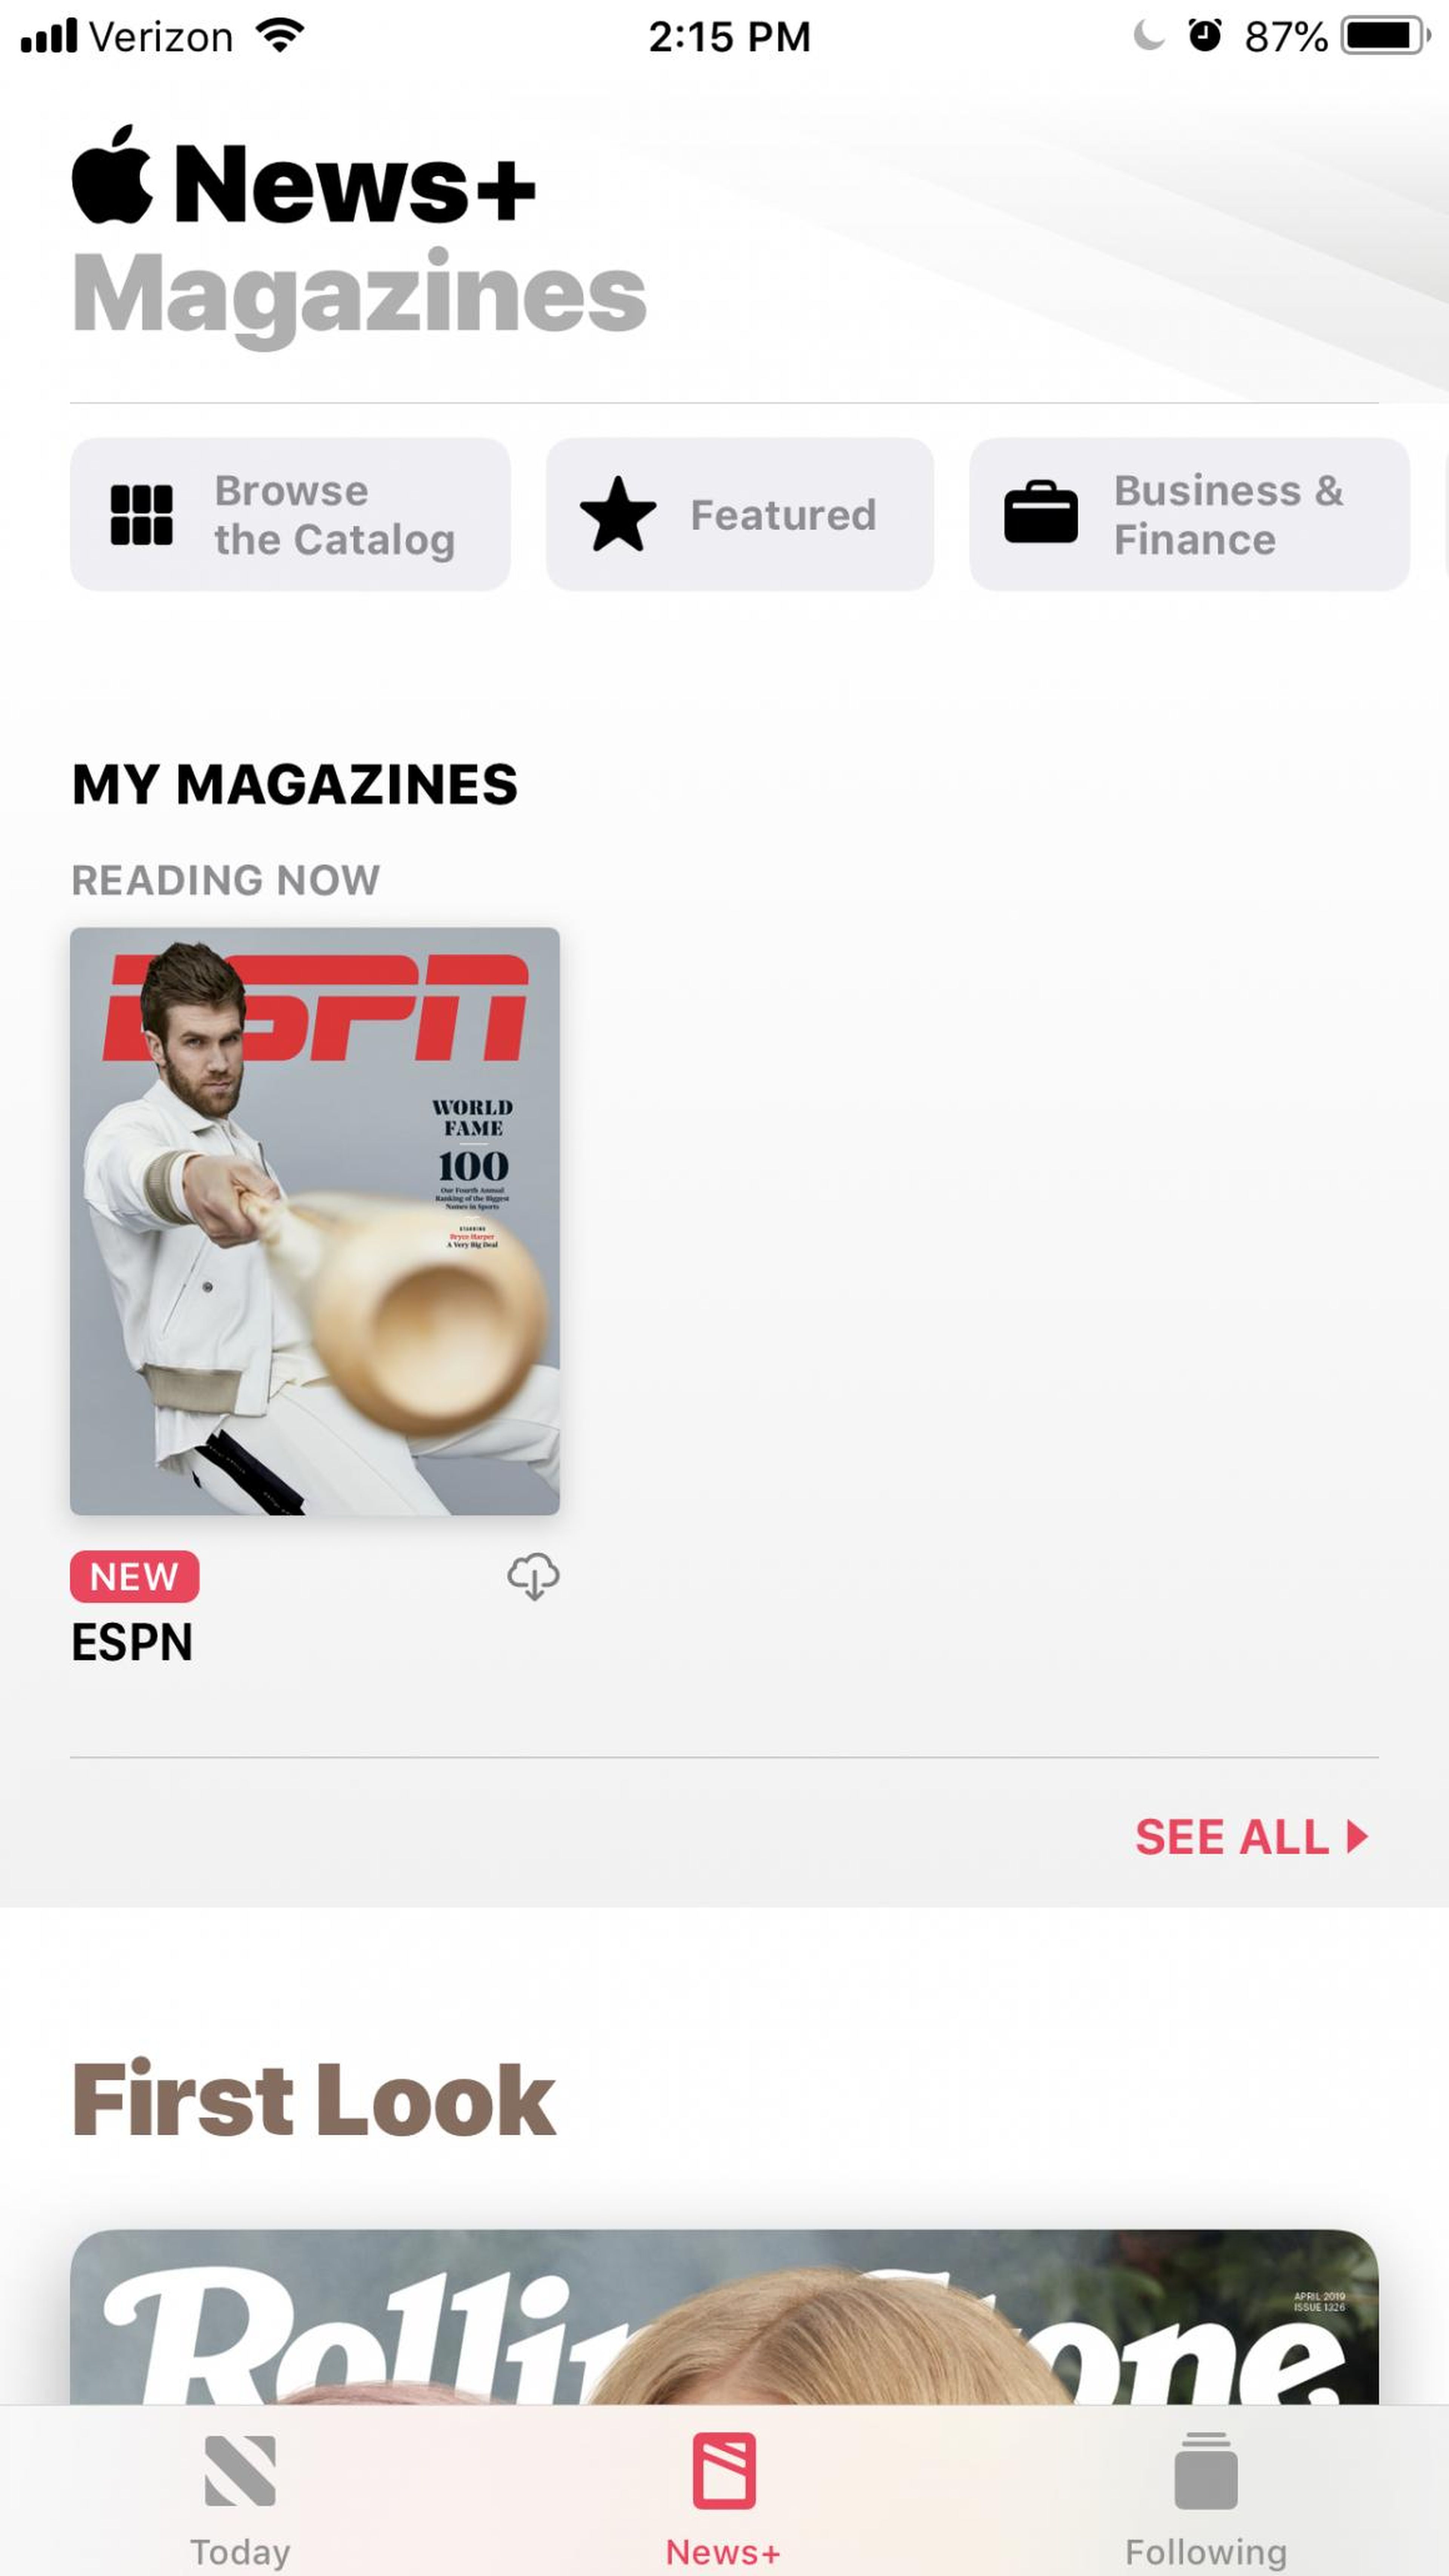 Apple News Plus keeps tabs on magazines you've read or like, keeping them in a section called "My Magazines."